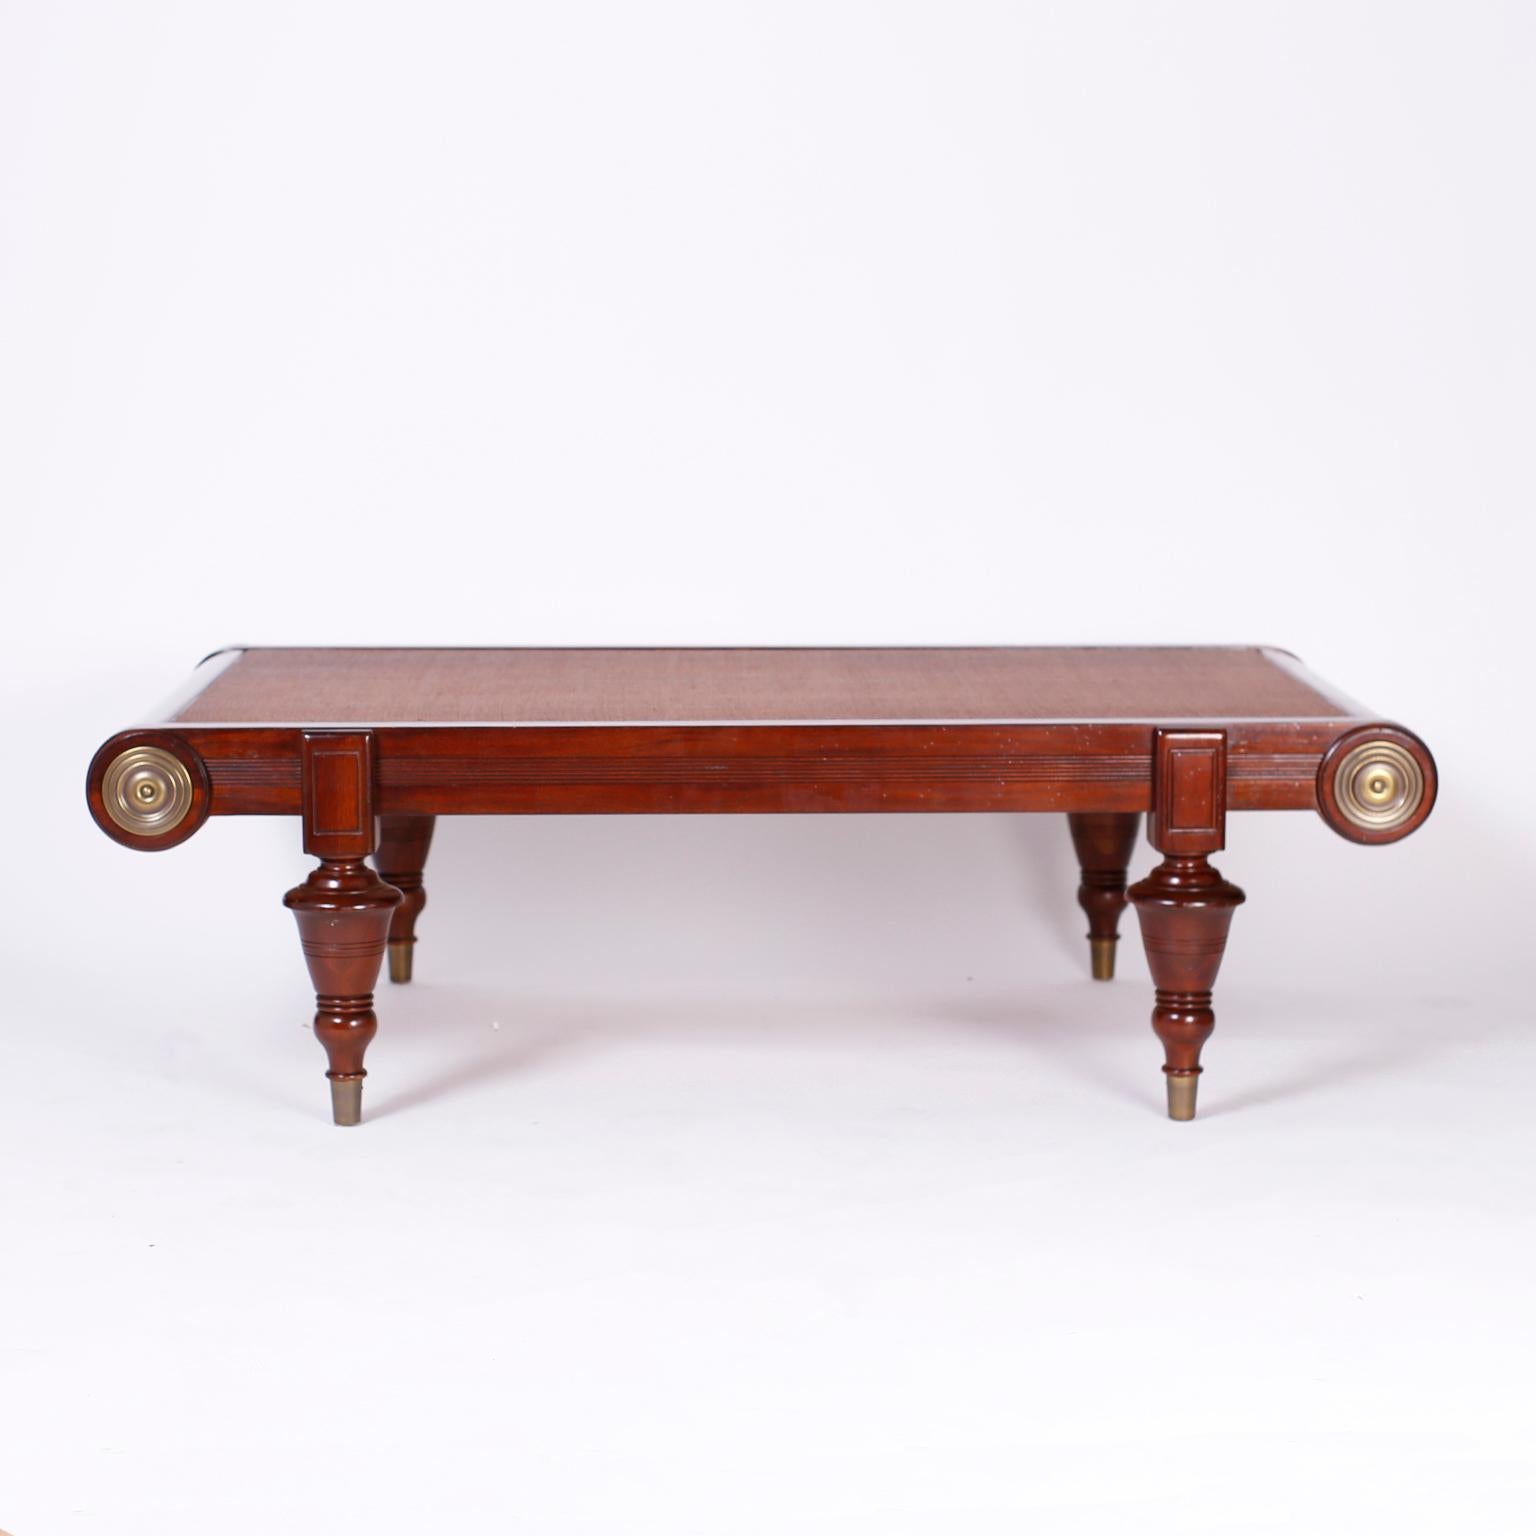 British colonial style coffee table with a grasscloth top and a mahogany frame with brass medallions designed with 19th century influences, bold turned legs, and brass feet.